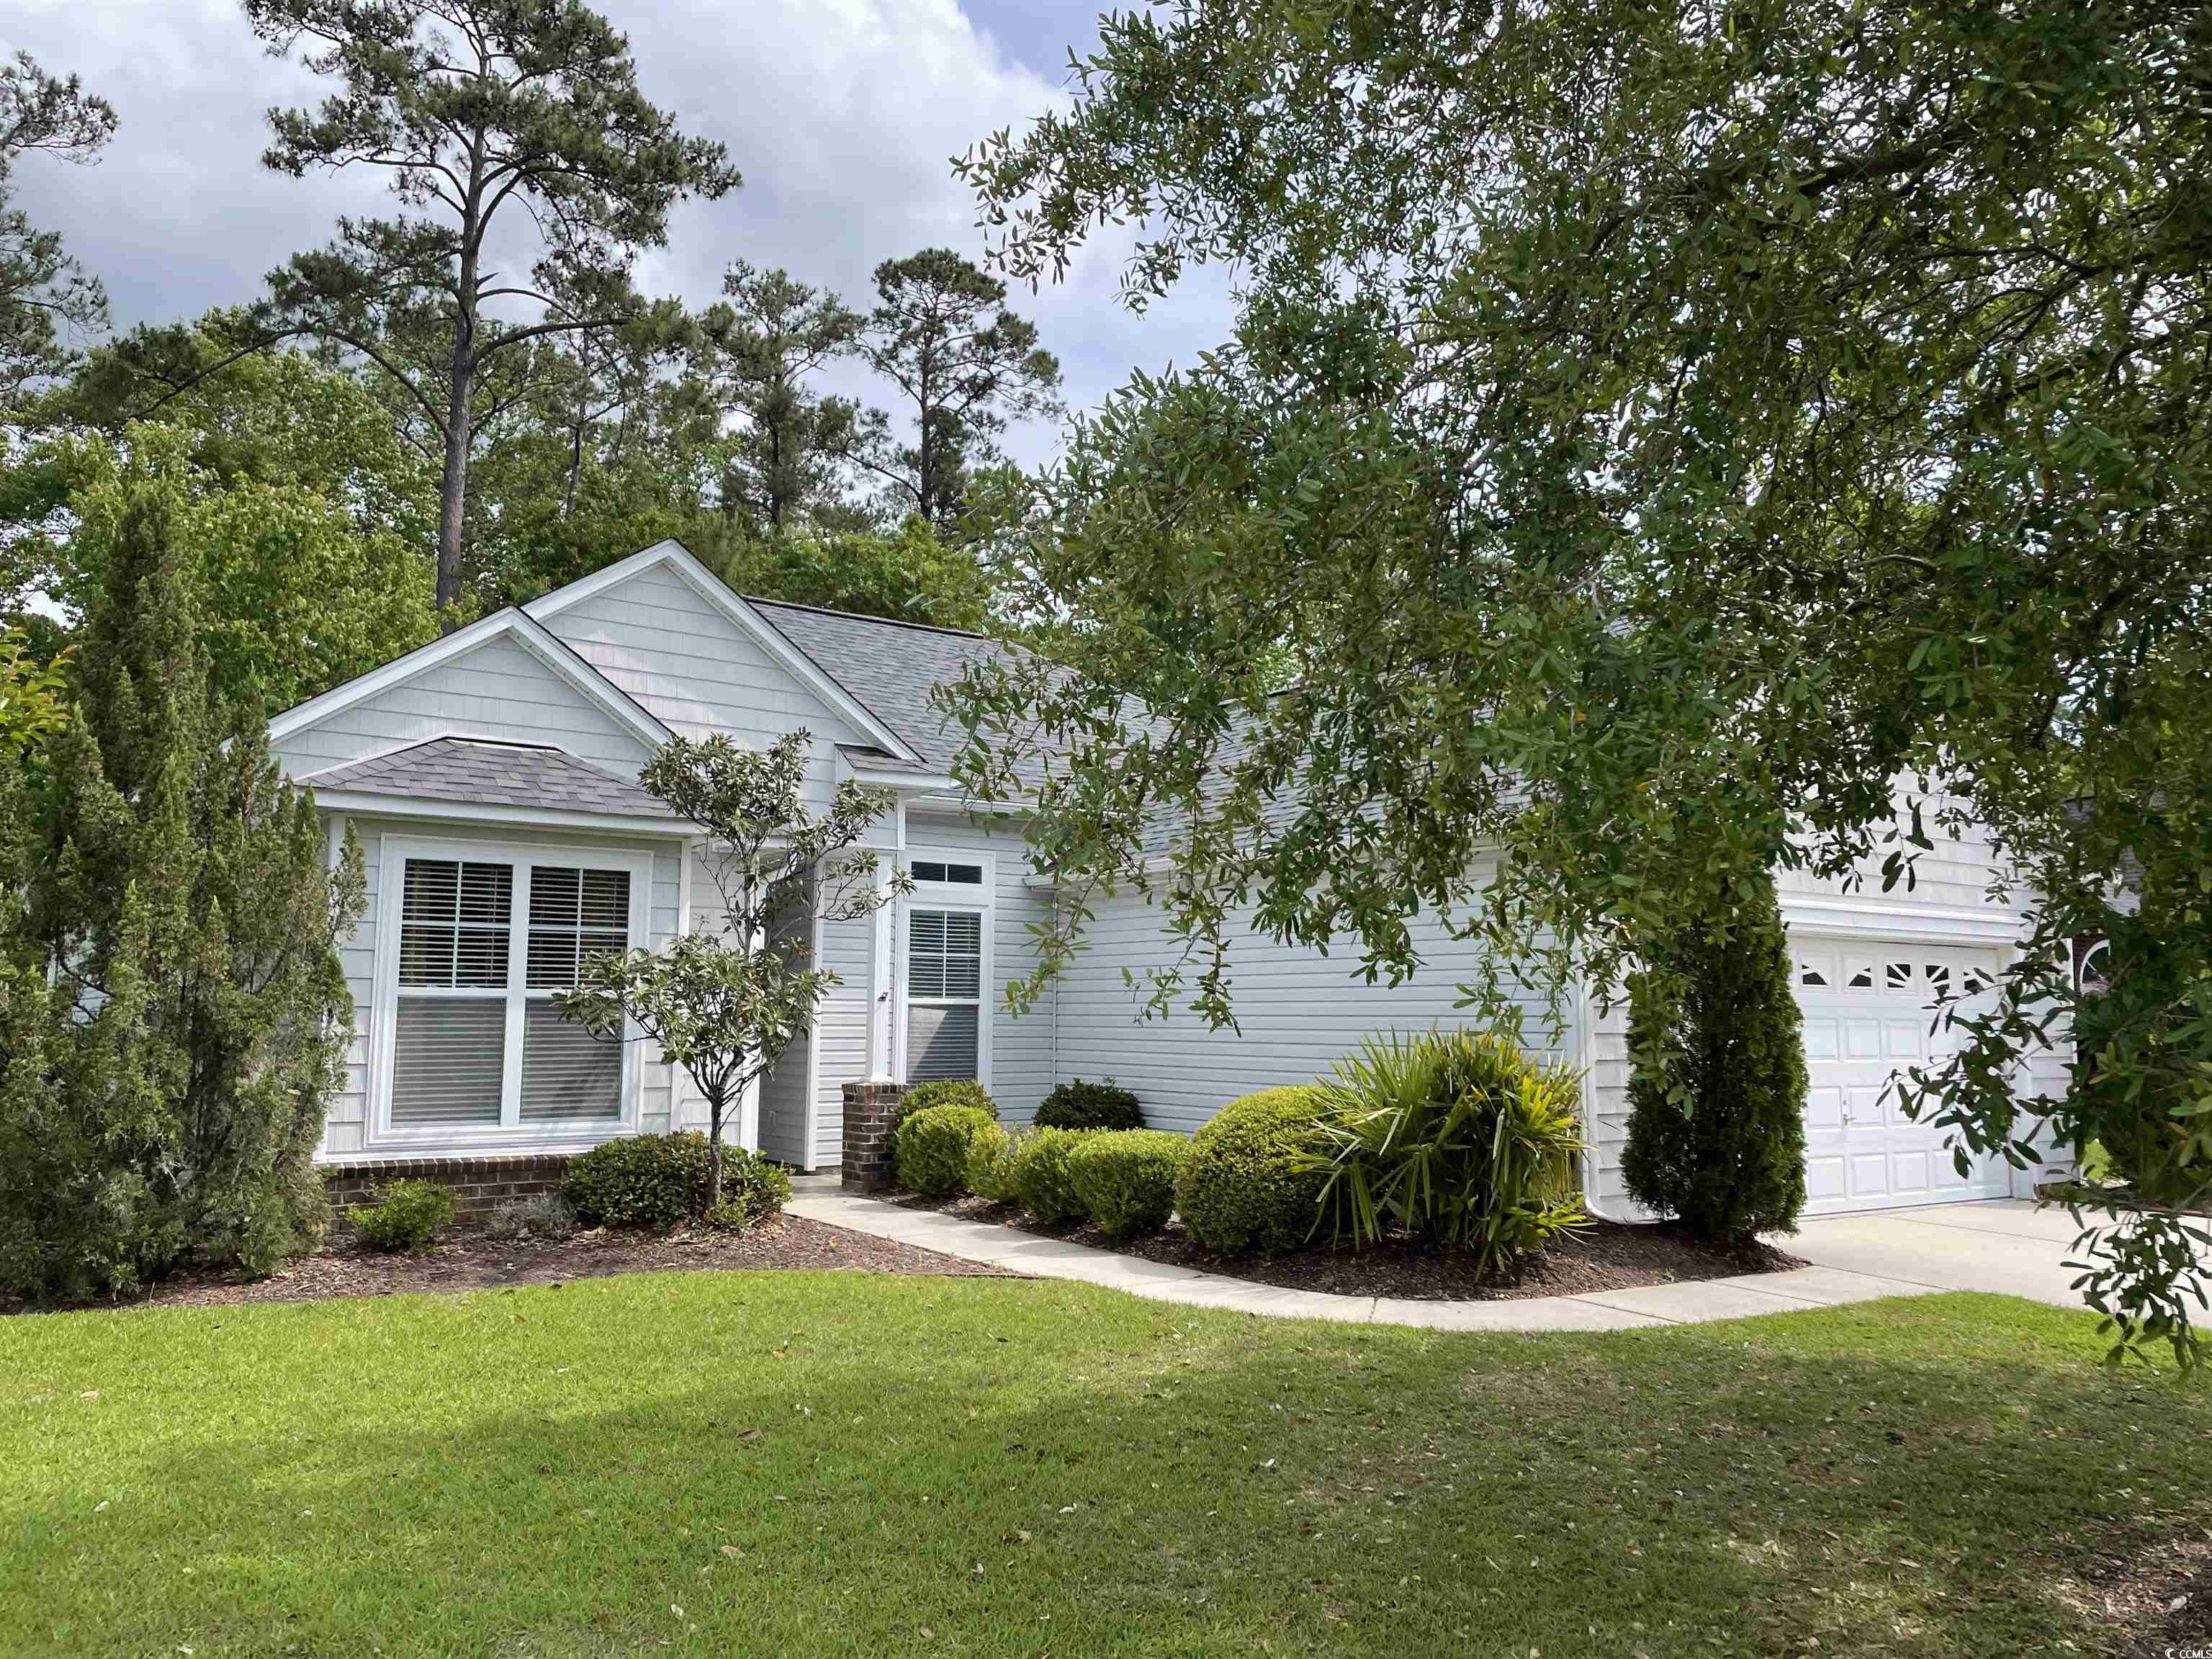 ** brand new roof added 3/20/24! ** located in the prestigious linksbrook at prince creek community in murrells inlet, this lovely 3 bedroom, 2 bath home is perfectly situated on a wooded natural preserve that borders the backyard offering peaceful solitude. the popular barrington model provides one-level living with a well-designed open floor plan that also offers privacy with the split bedroom design. the home showcases beautiful wood laminate flooring in the main living space with carpet in the bedrooms. the ceilings are tall and smooth throughout the home and combined with the vaulted ceilings that are featured in the kitchen, family room and the carolina room, they increase the open feel. the large kitchen boasts of cherry wood cabinetry, a pantry and a spacious breakfast nook. the carolina room is enriched with a steady flow of natural sunlight through the abundance of windows that enhance this room and the adjacent family room. the primary bedroom has a generously sized walk-in closet and a double trey ceiling and a decorative ceiling fan. the ensuite bath offers a vanity, soaking tub and separate walk-in shower. the two guest bedrooms have 9’ ceilings, ceiling fans and spacious closets. the guest bath has a tub/shower combination with easy access to the hallway linen closet. the utility room offers a full-size washer and dryer that convey with the purchase. the two-car attached garage provides appreciated convenience plus additional storage provided with pull-down steps to the generous space located above. the linksbrook community amenities include a private club house, zero-entry pool, fitness center, tennis courts, picnic area & playground. the prince creek community is home to the tpc players club and several other renowned golf courses, the popular marsh walk with an abundance of incredible restaurants, unique shops and a large selection of water/leisure activities including boating/fishing in both fresh and saltwater ~ as well as miles of gorgeous ocean beach to explore and enjoy! the information herein is furnished to the best of the listing agent's knowledge but it is subject to verification by the purchaser and their agent. listing agent takes no responsibility for the exactitude of information nor the condition of the property.